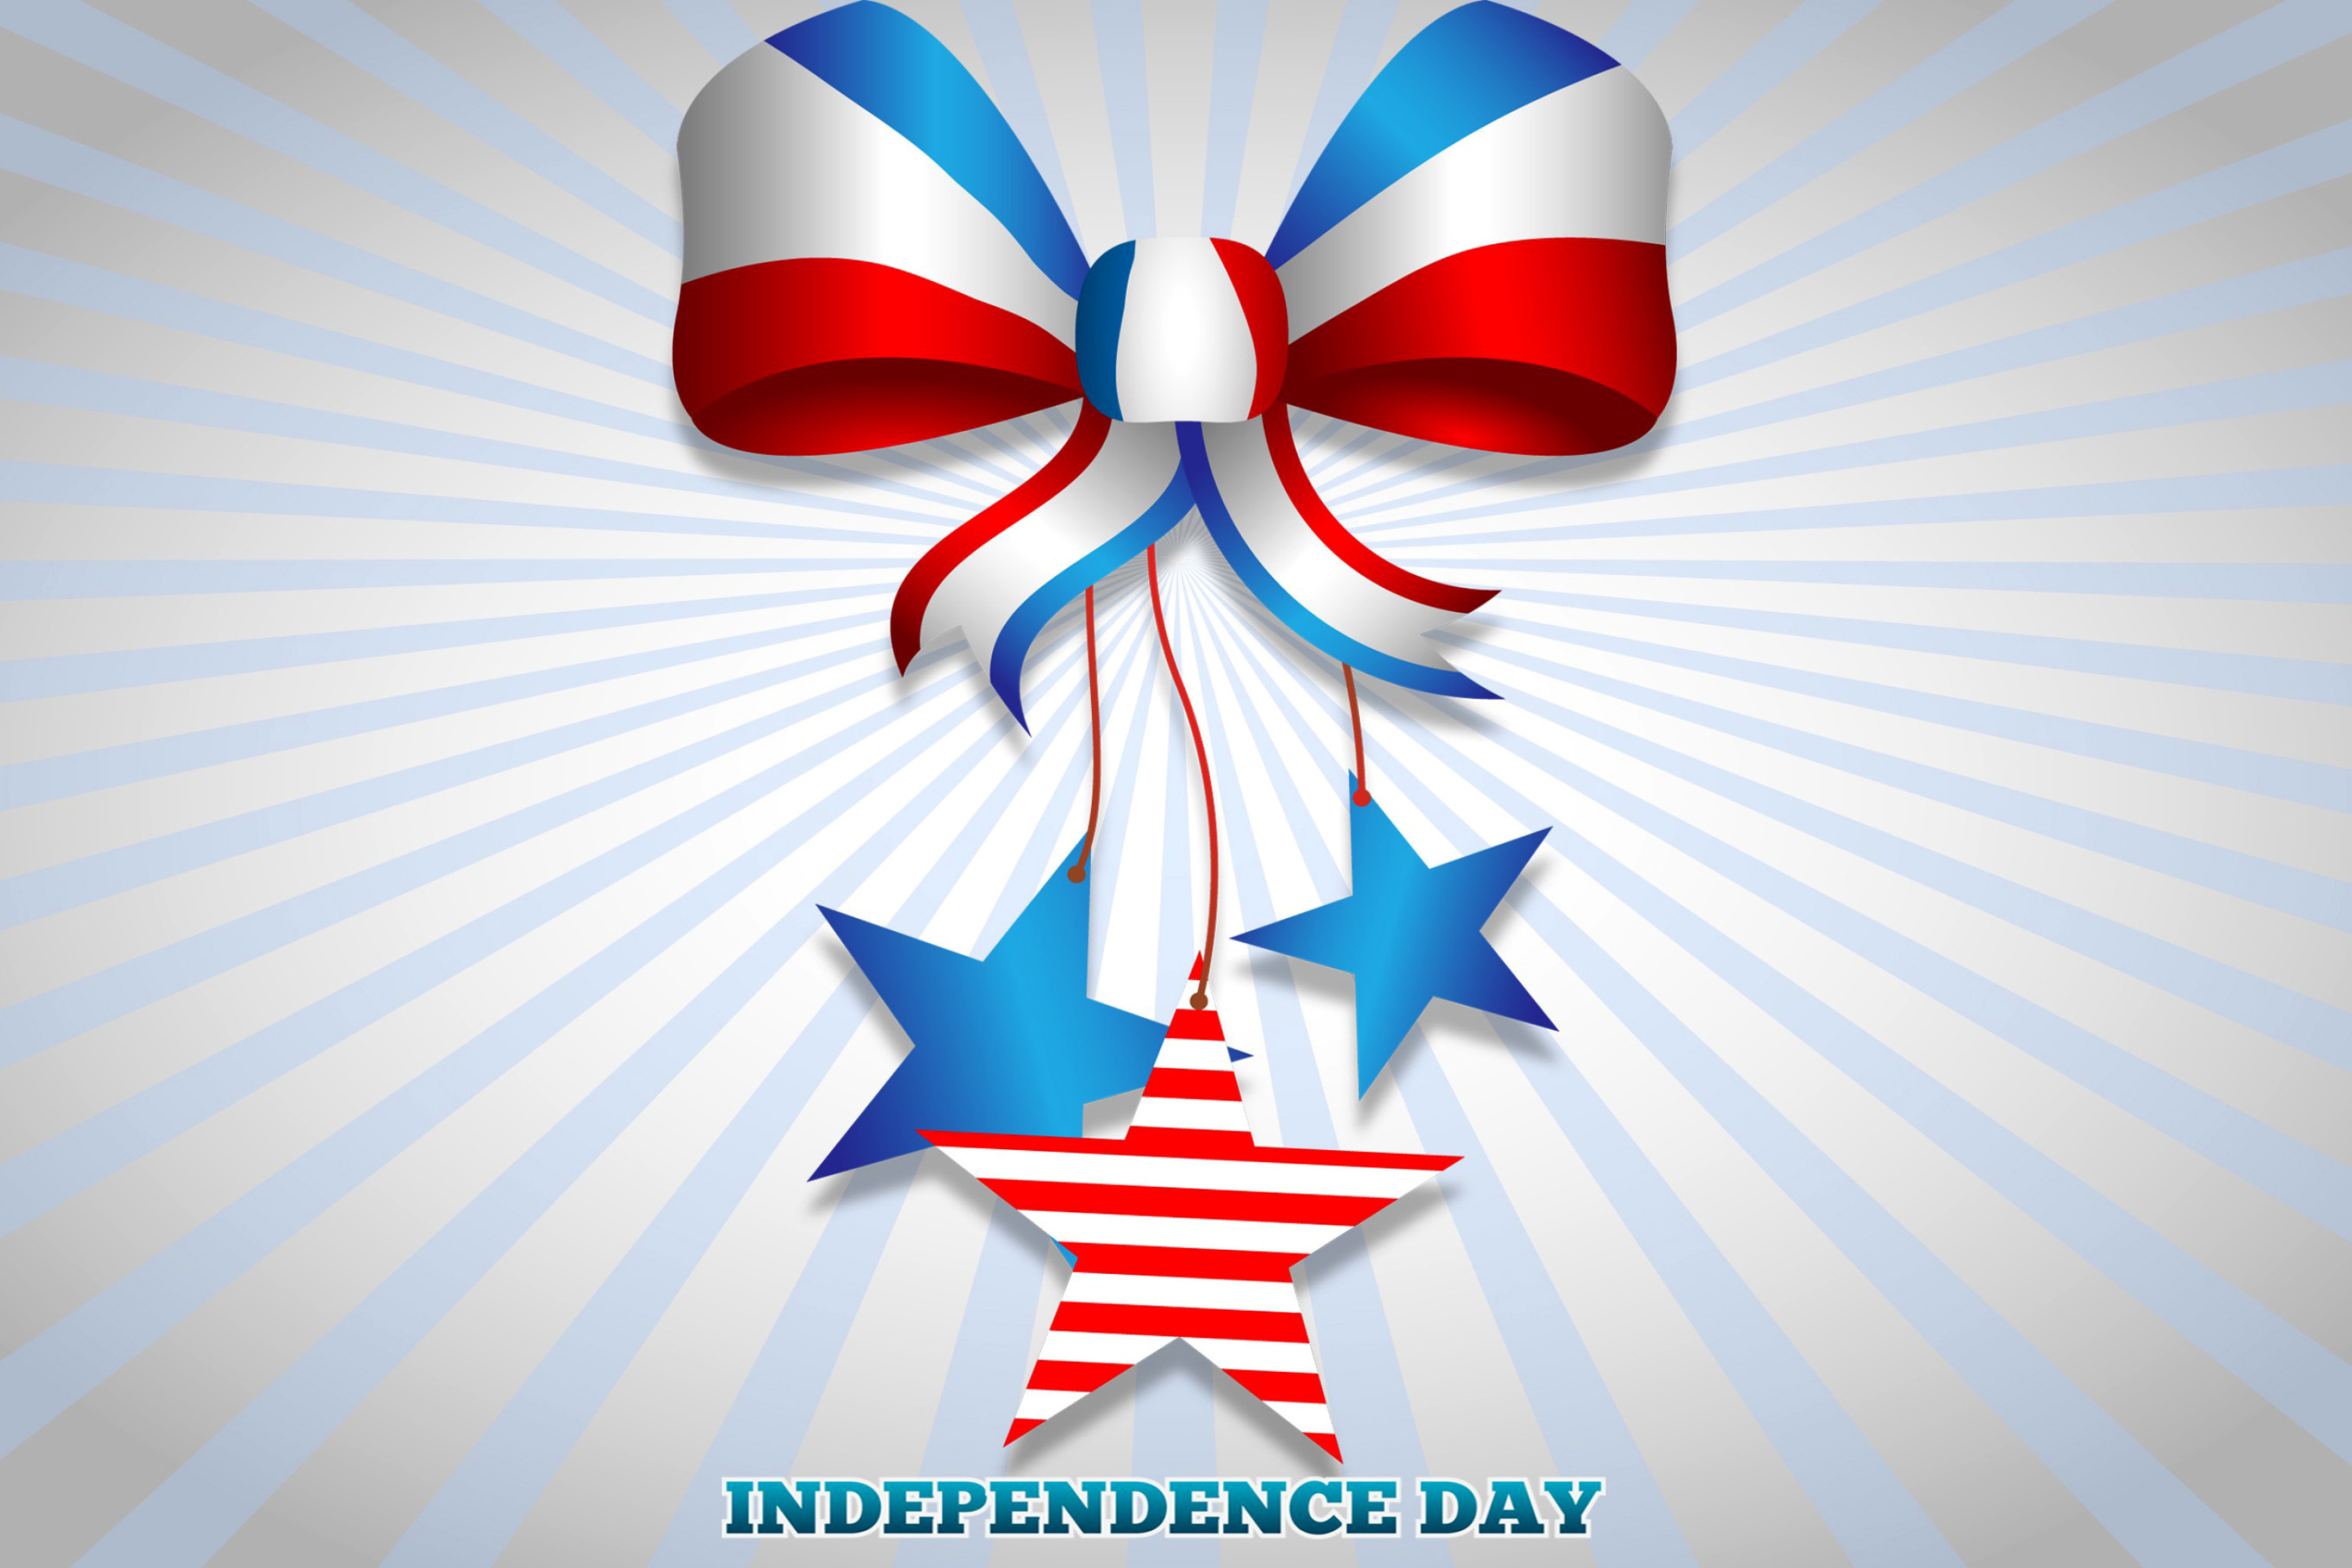 United states america Idependence day 4th july screenshot #1 2880x1920